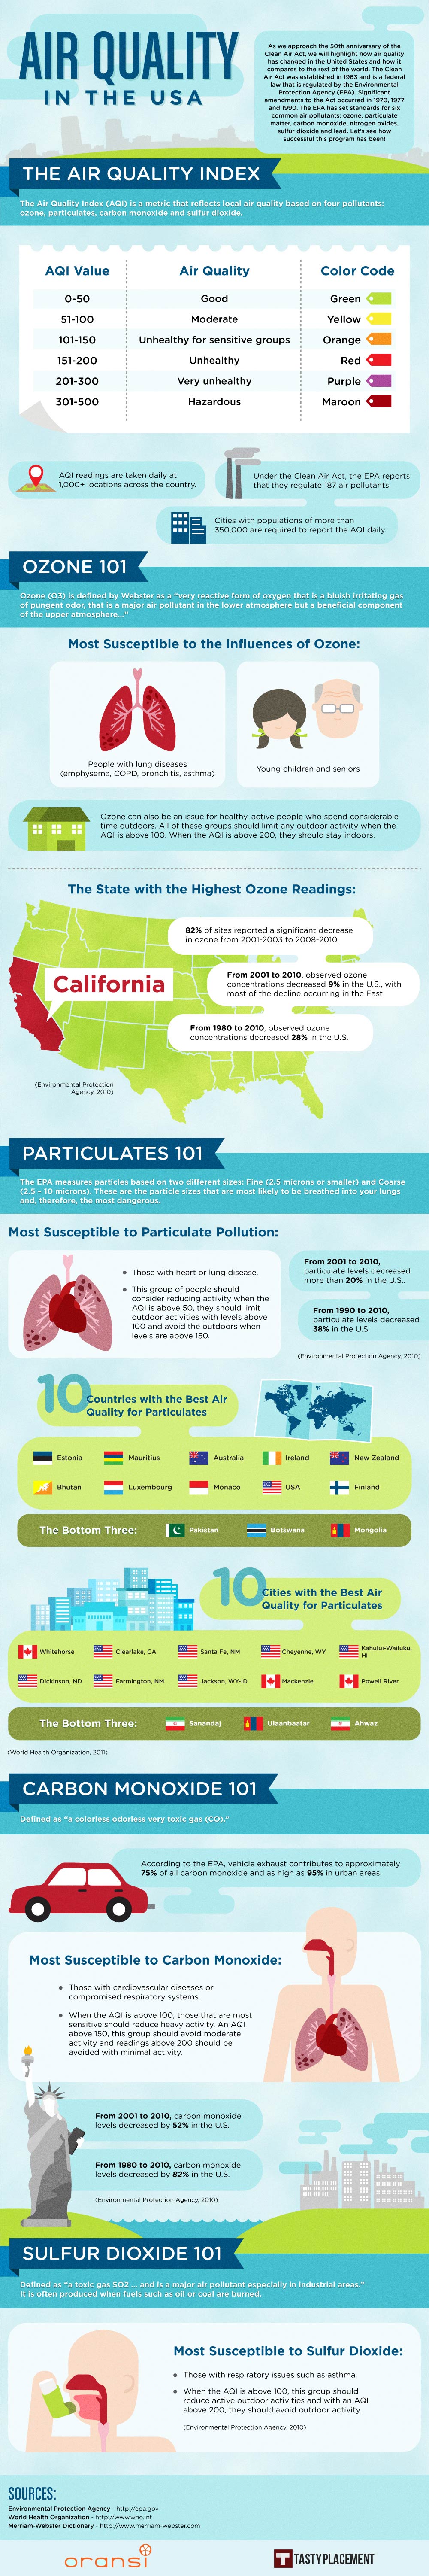 Air Quality in the United States